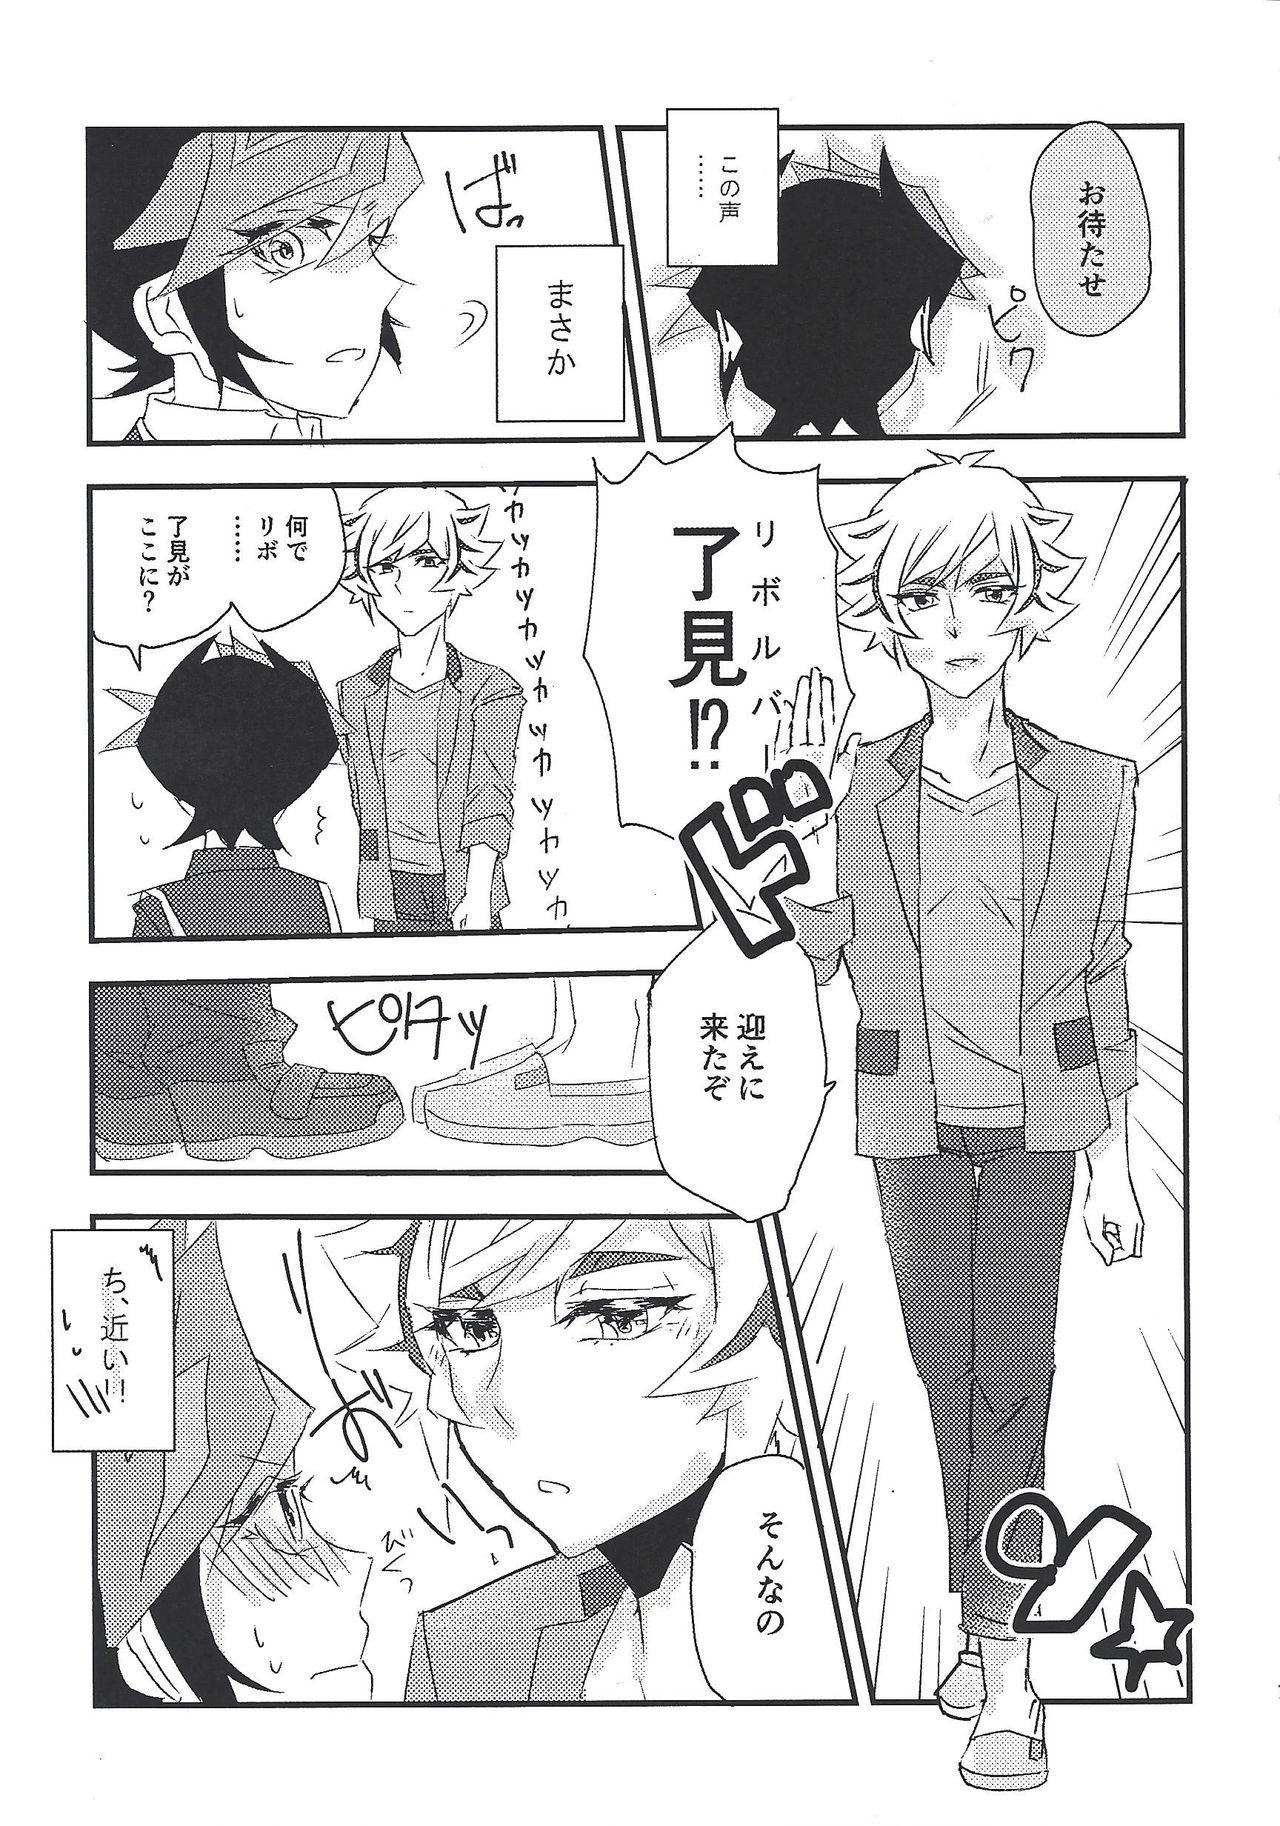 Real Amateurs Unmei ni oborete - Yu gi oh vrains Room - Page 5